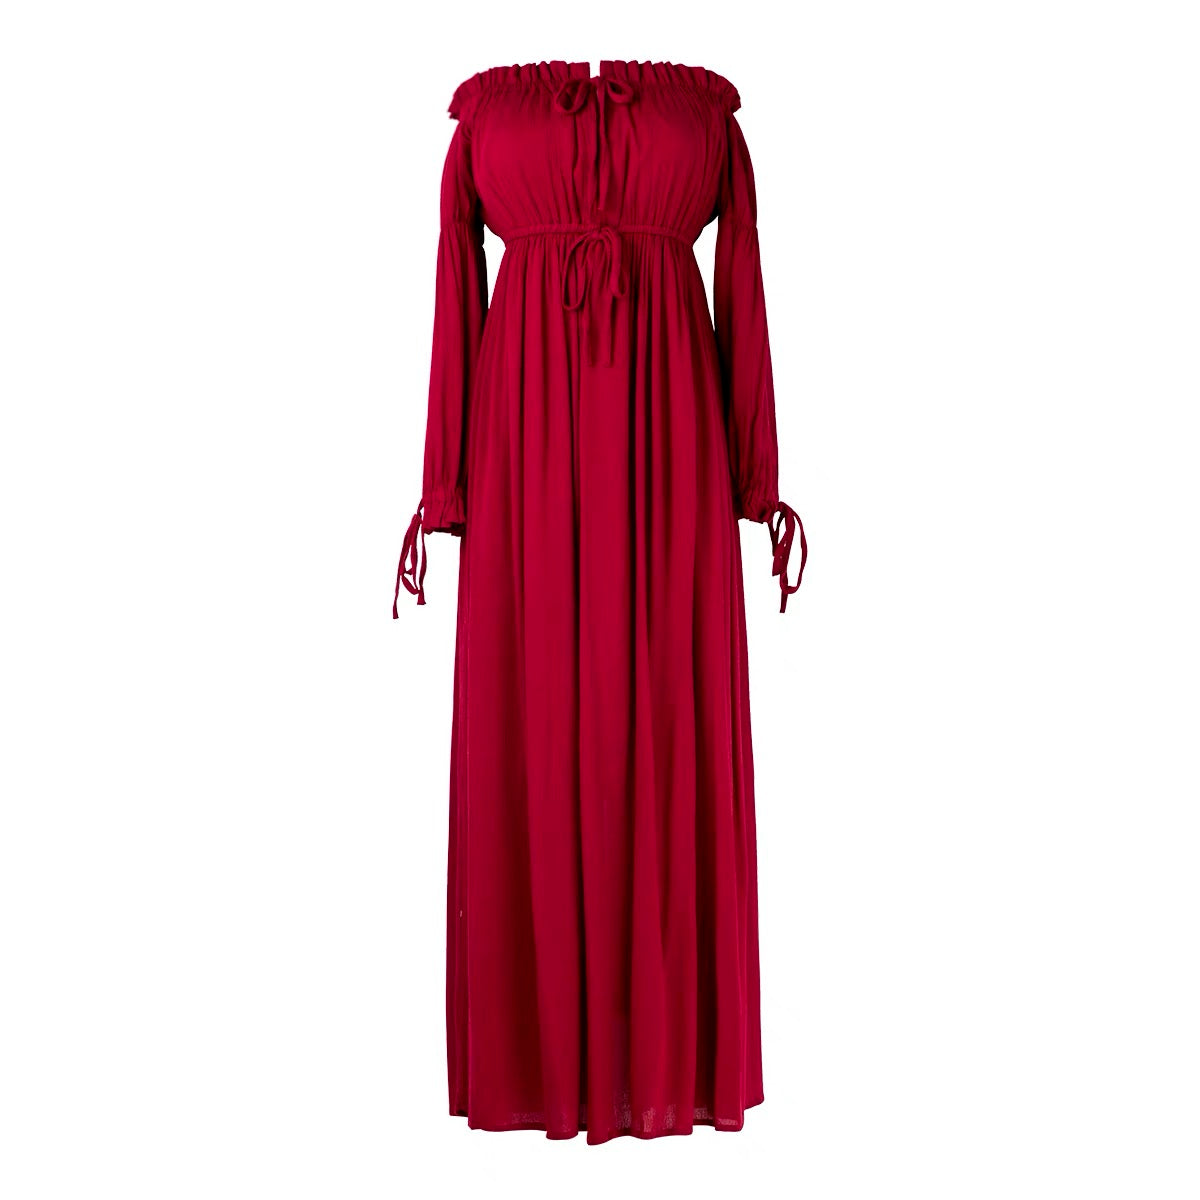 Off Shoulder Blouse Sleeve Maxi Dress in Red